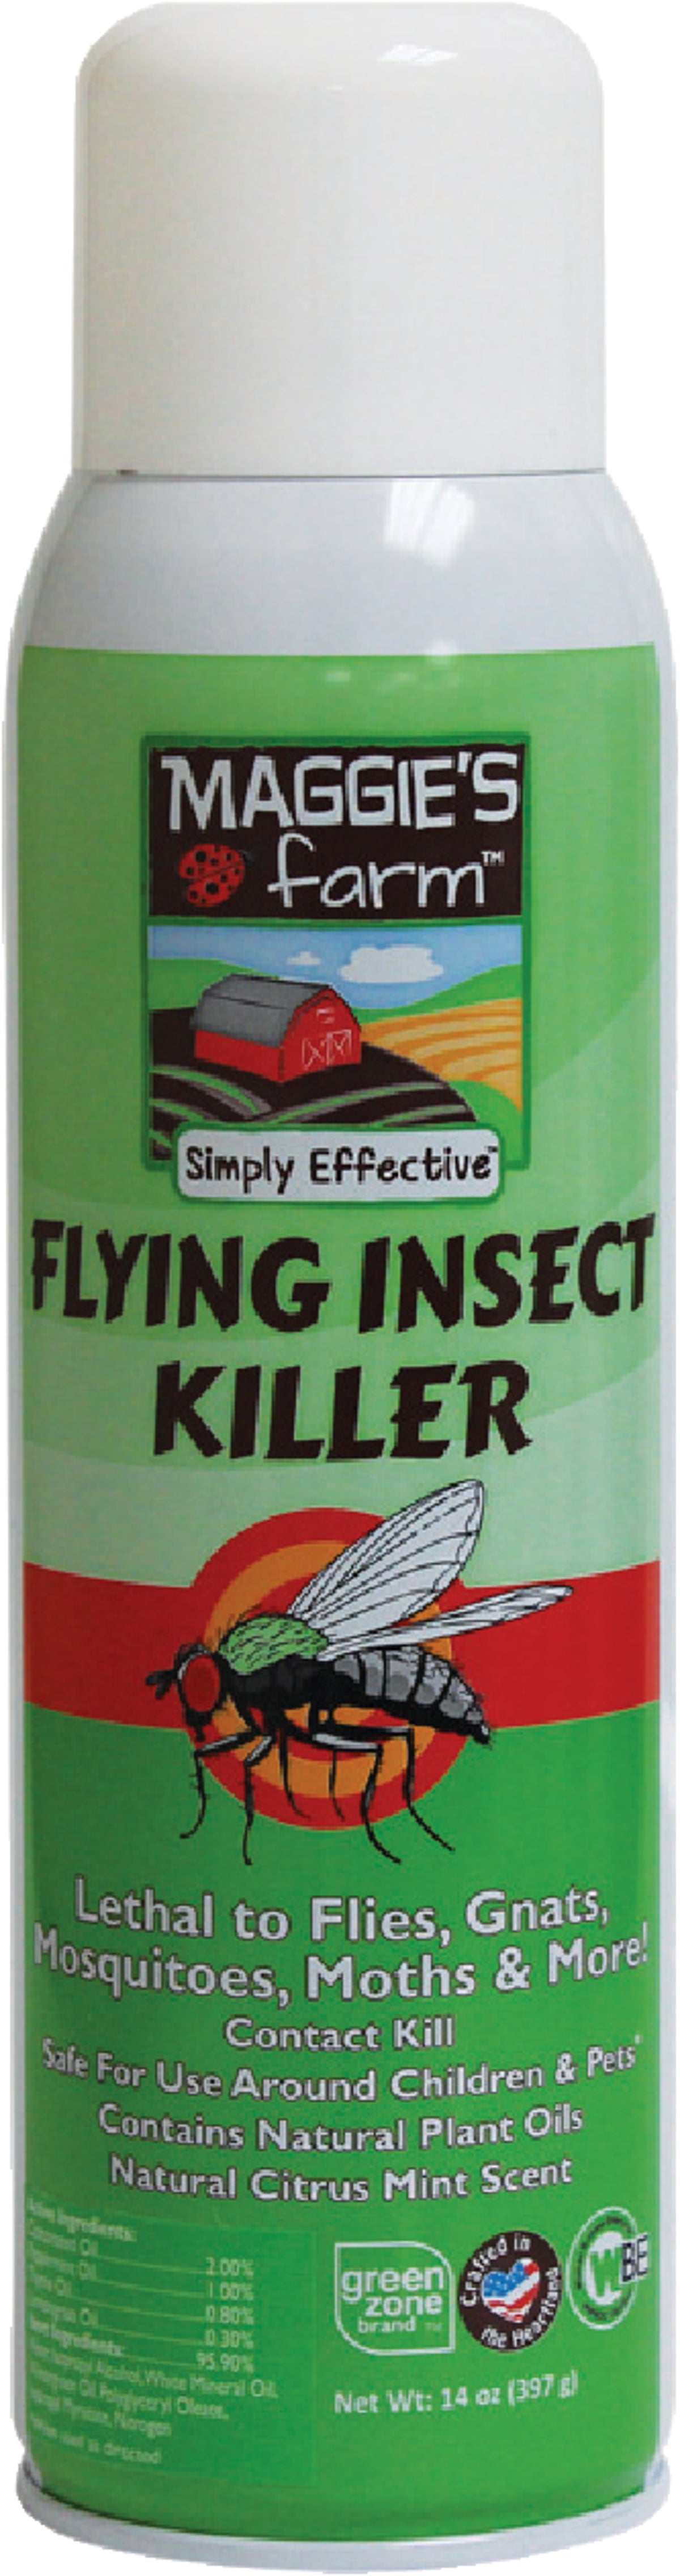 Safer® Home Indoor Plug-in Fly Trap Refill Pack